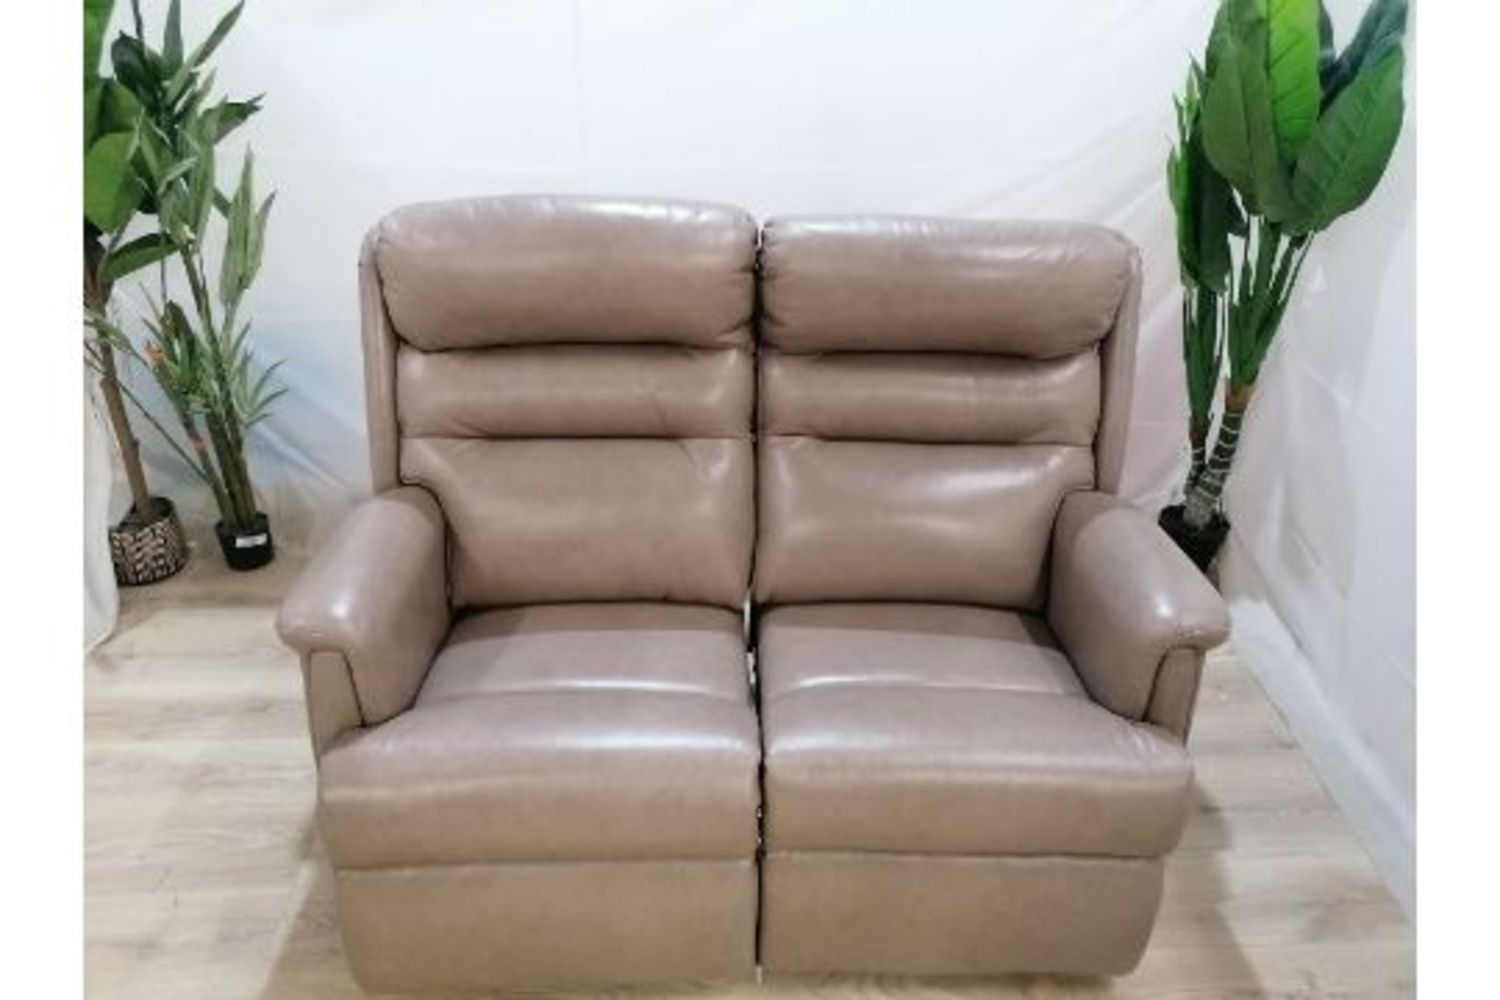 Sofas and chairs only 10% buyer premium from Swoon, Heals, Oak furniture land and more